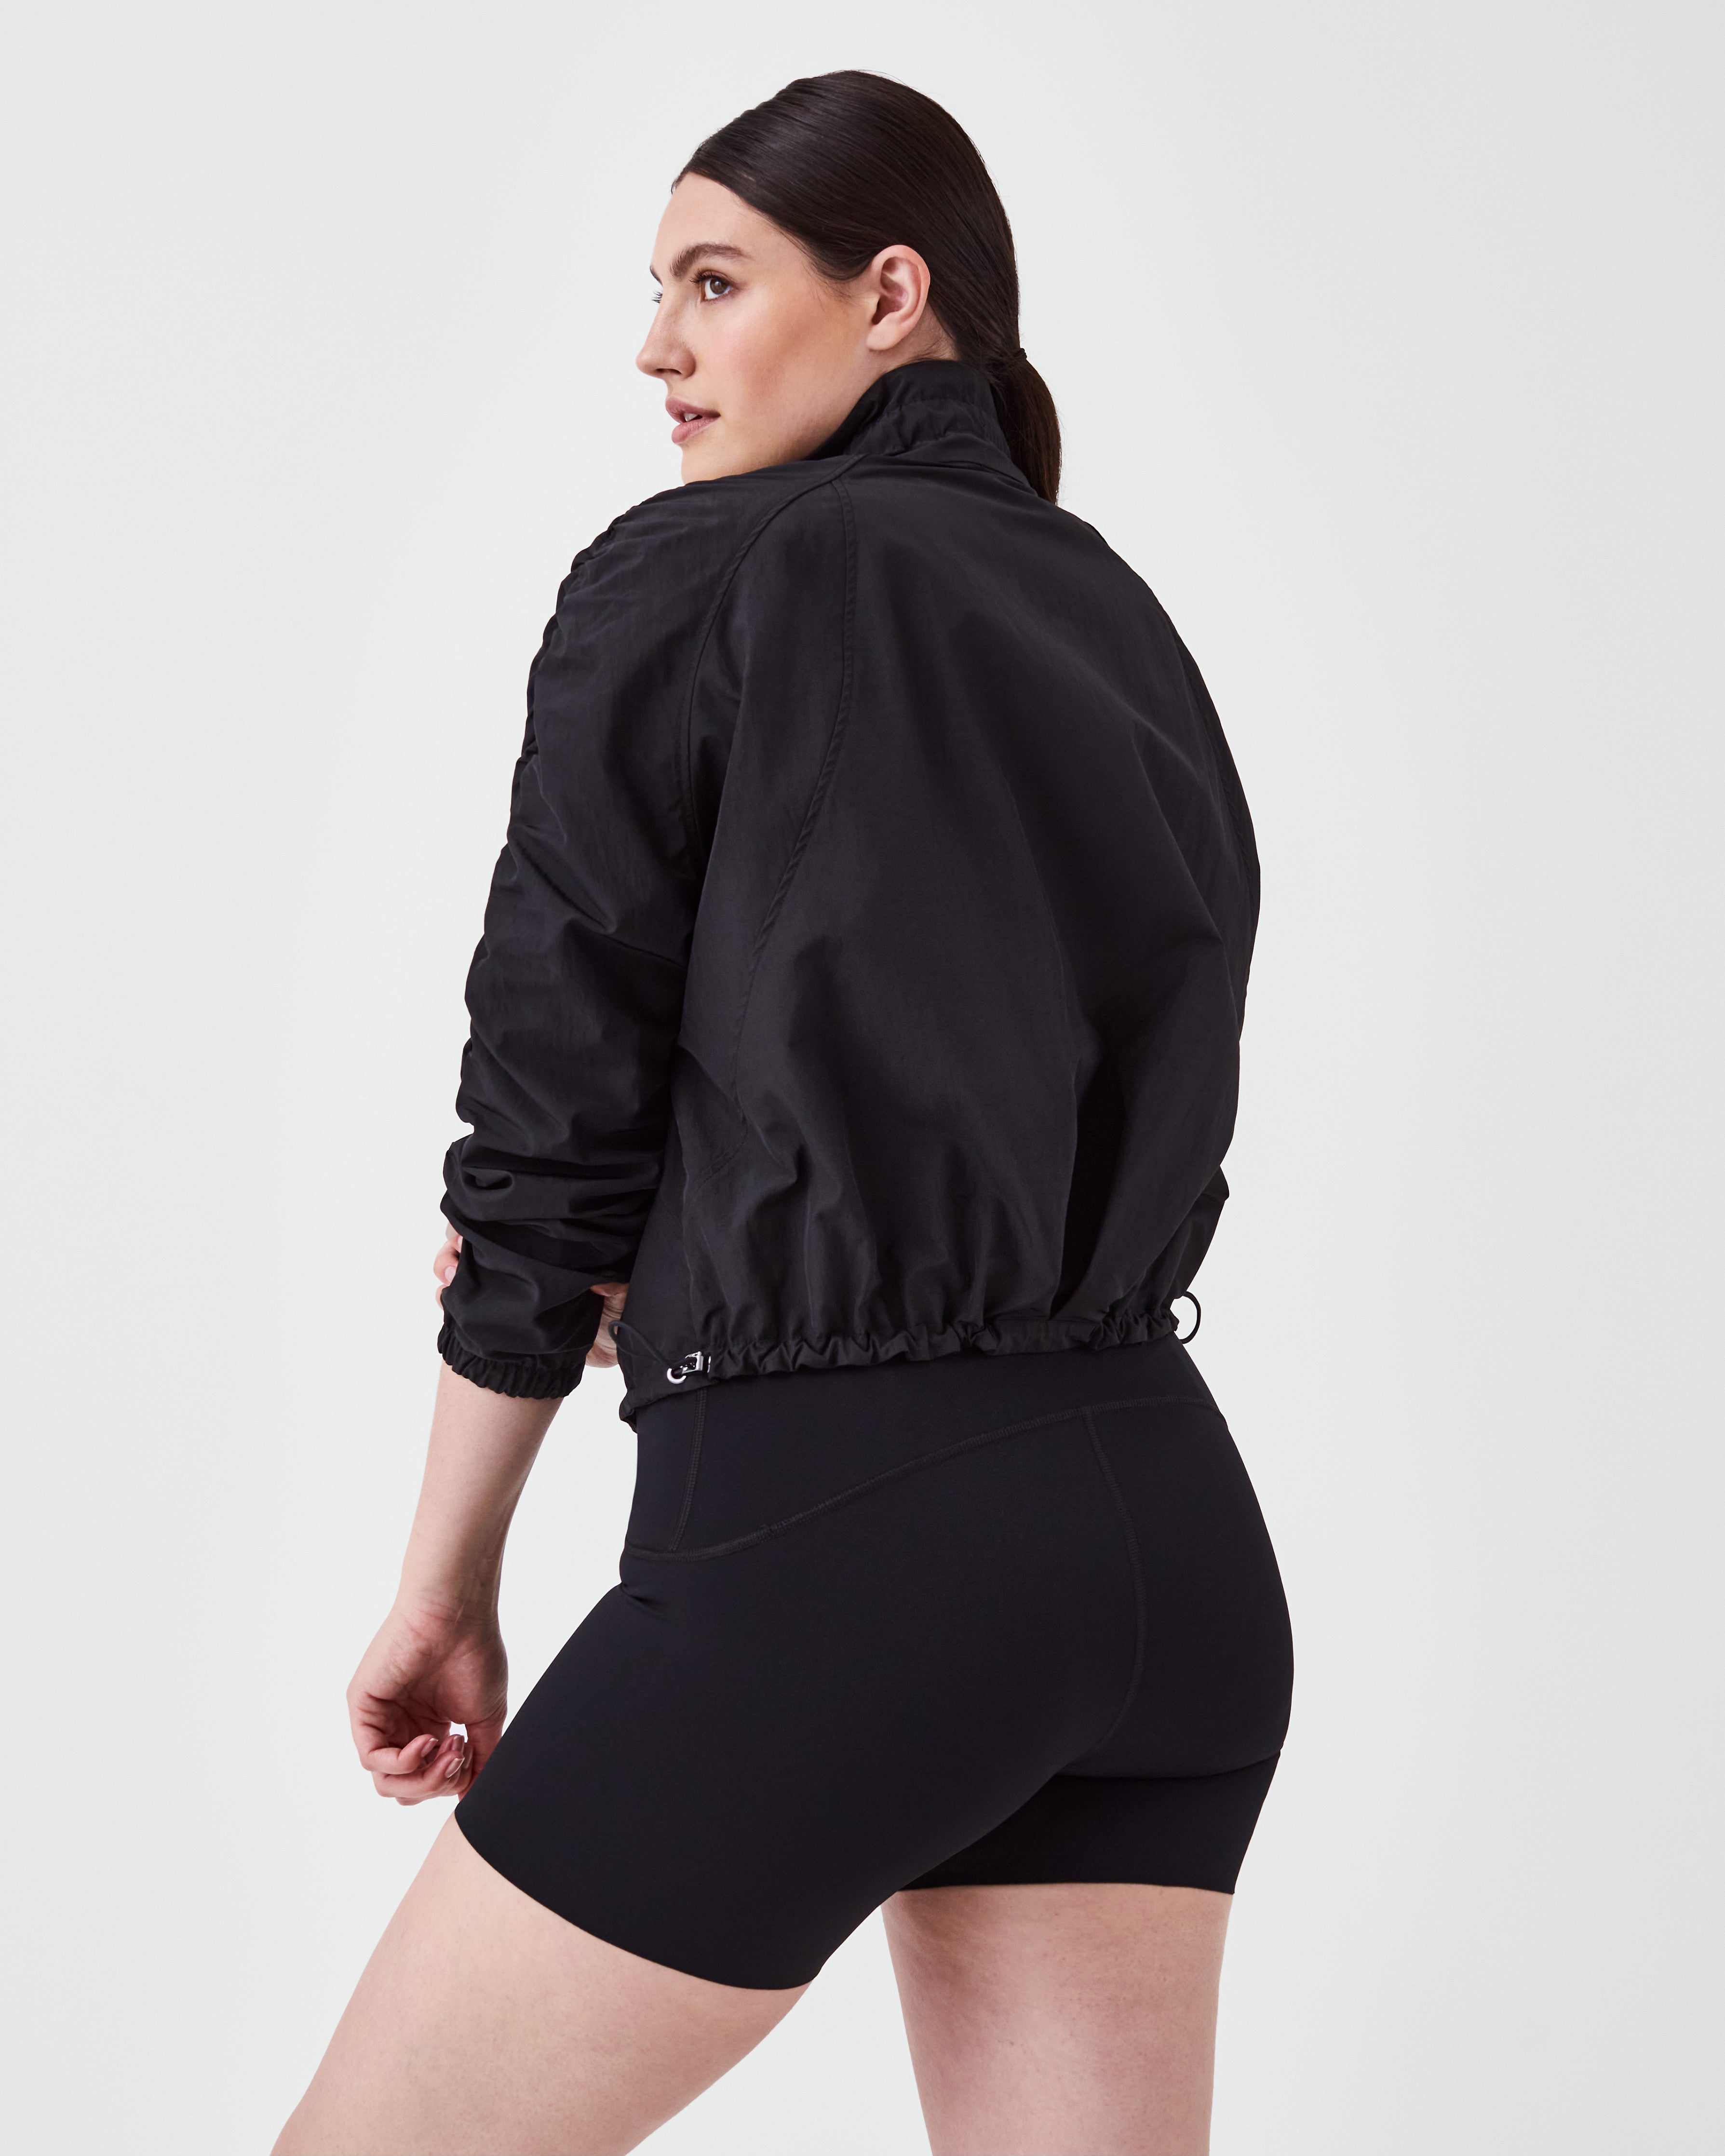 New Jackets Are Dropping… - Spanx